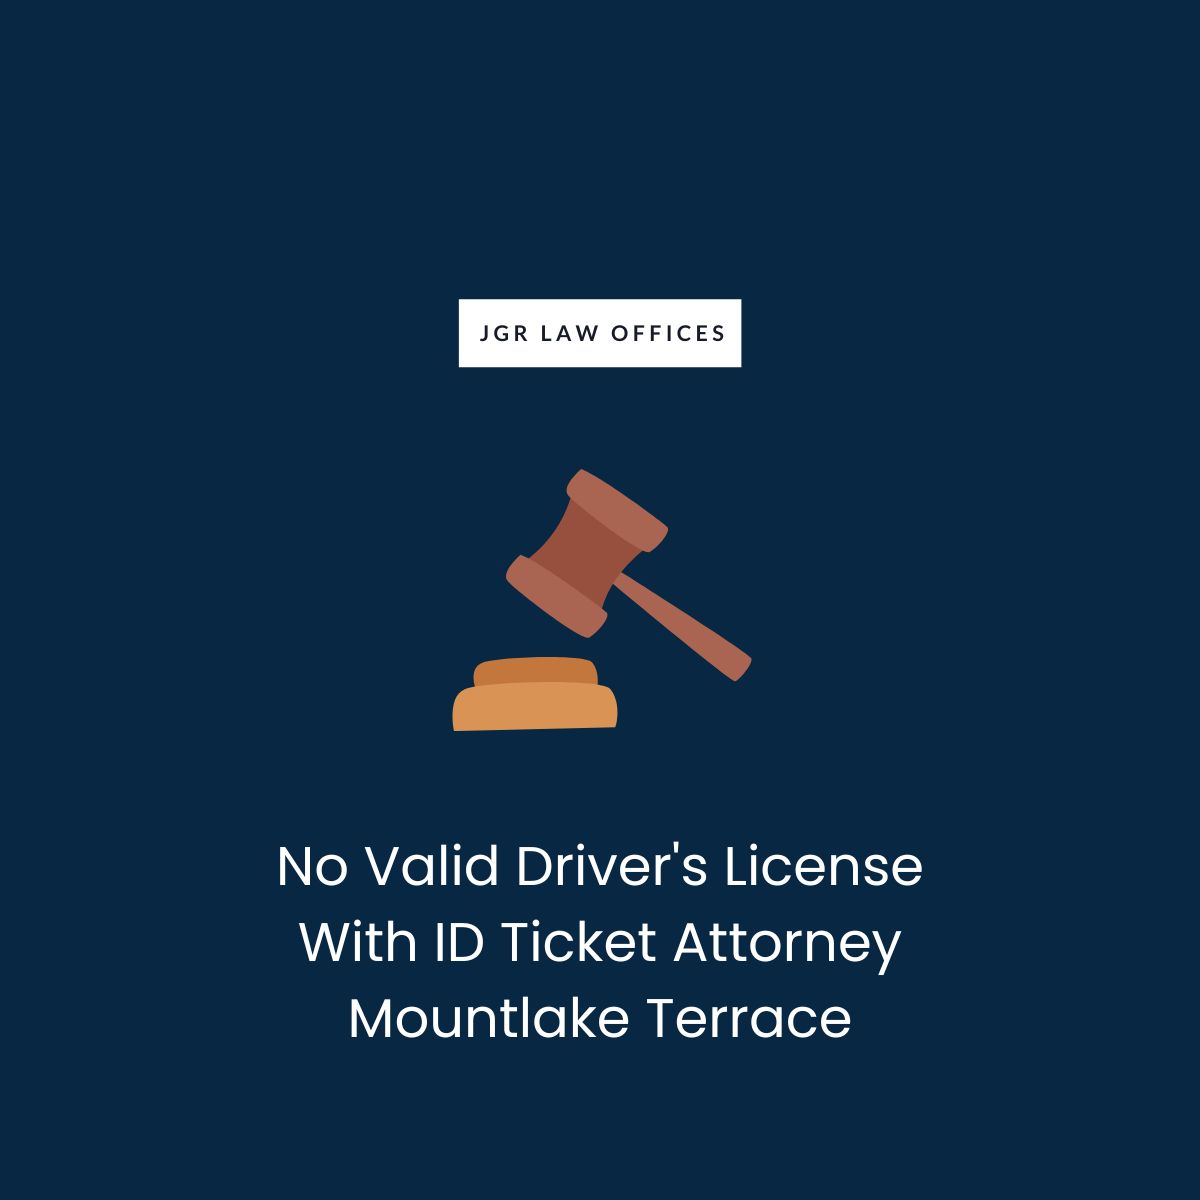 No Valid Driver's License With ID Ticket Attorney Mountlake Terrace